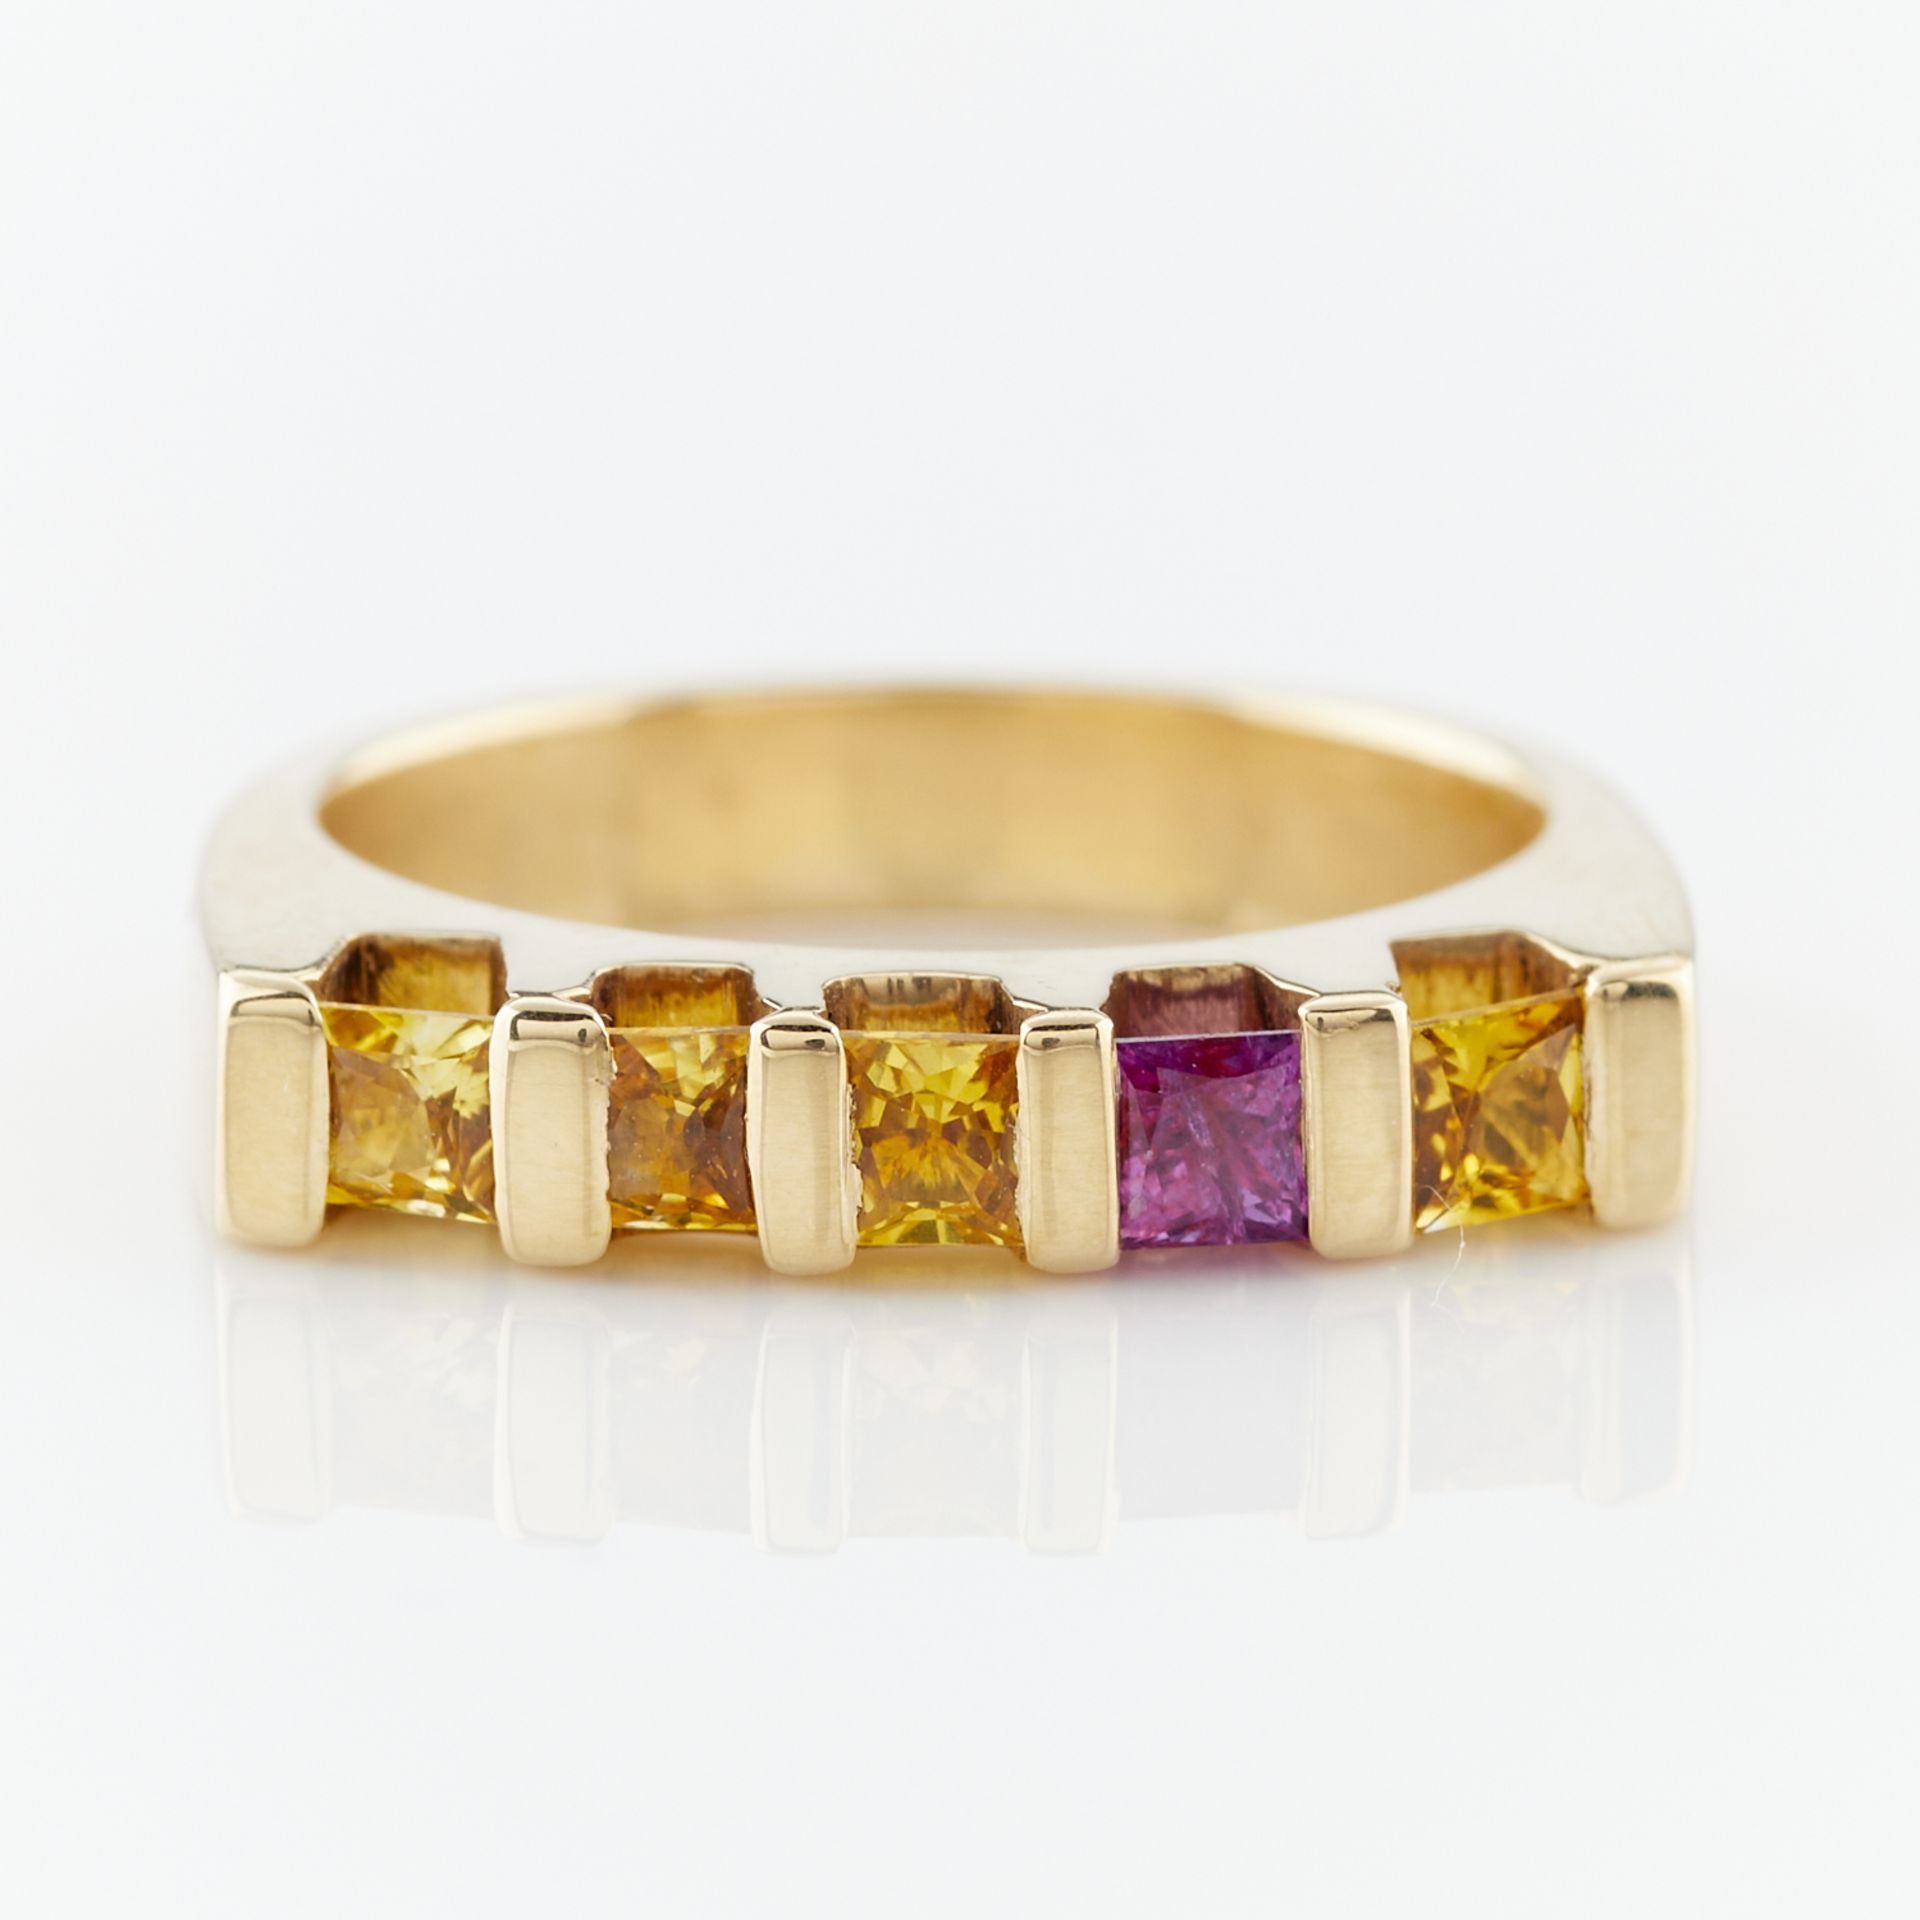 14k Yellow Gold & Sapphire Ring - Image 10 of 11